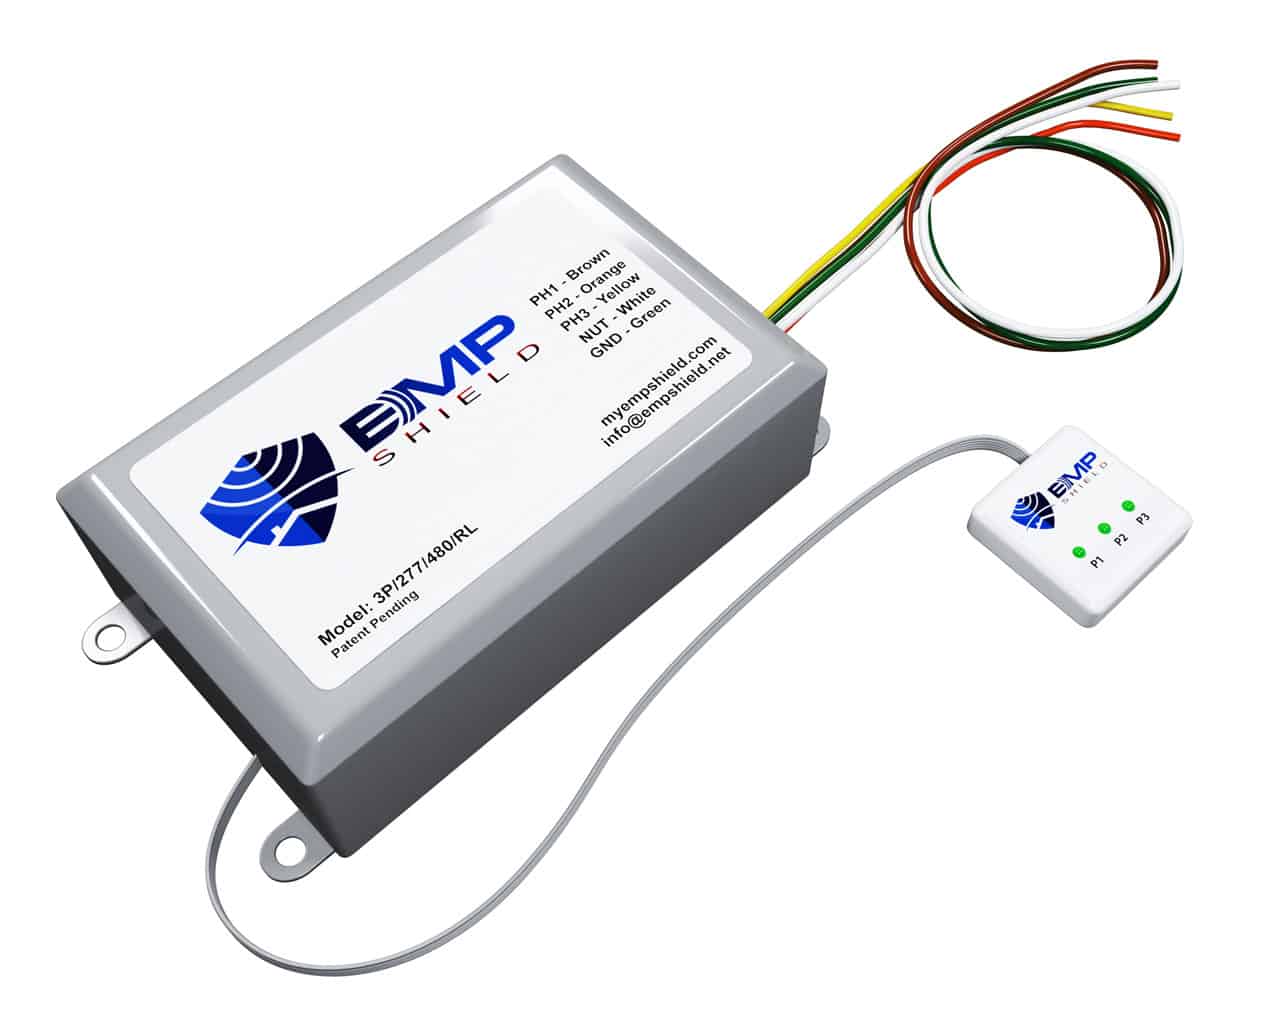 The EMP power supply is connected to a concealed model power supply with external LEDs.